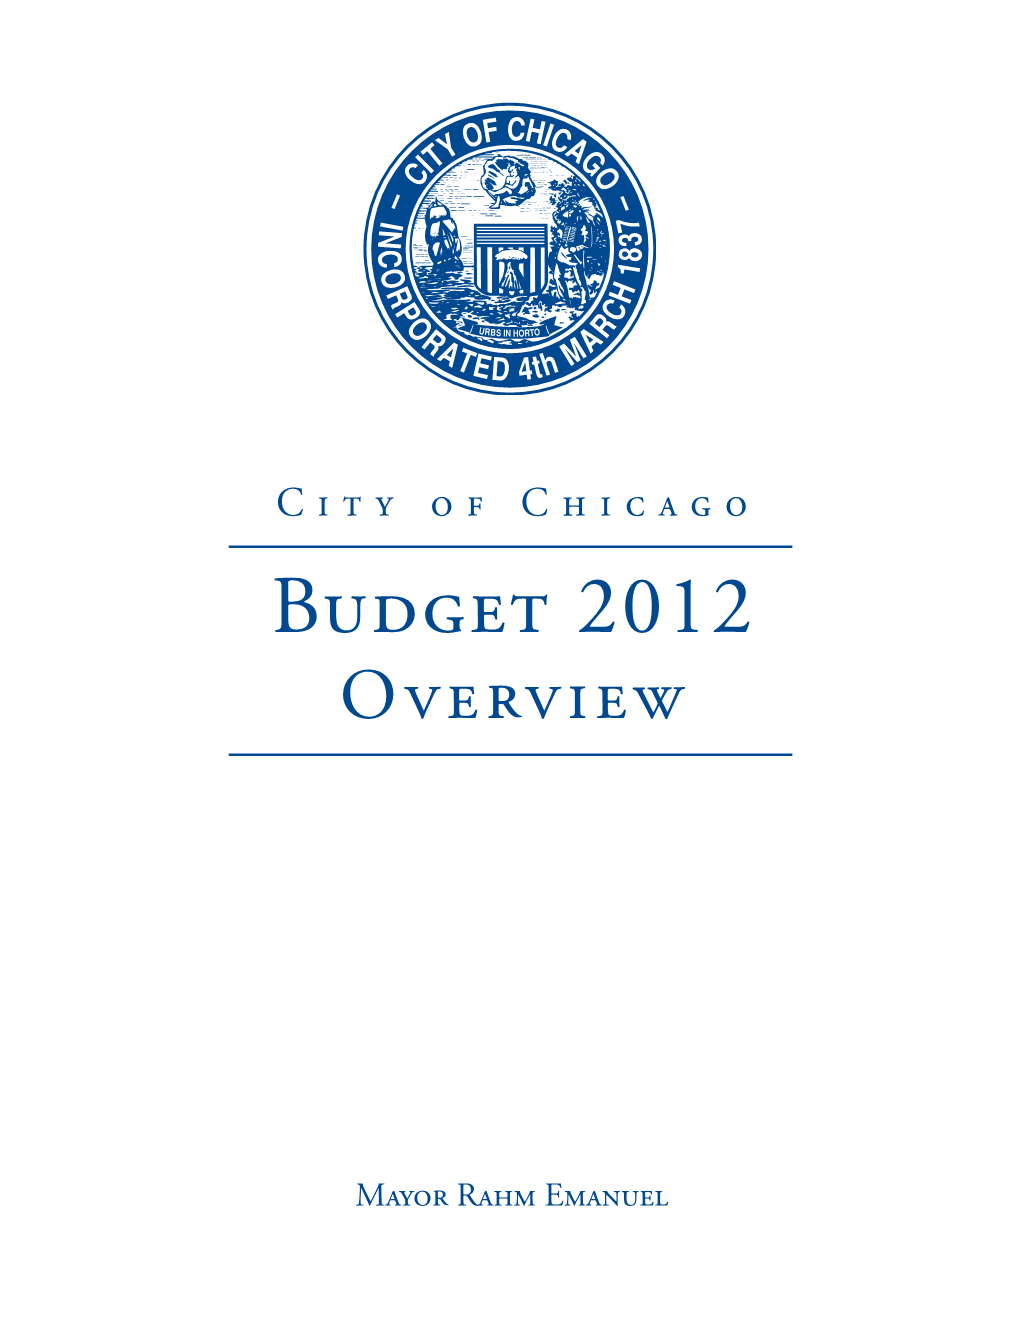 The 2012 Budget Overview Document